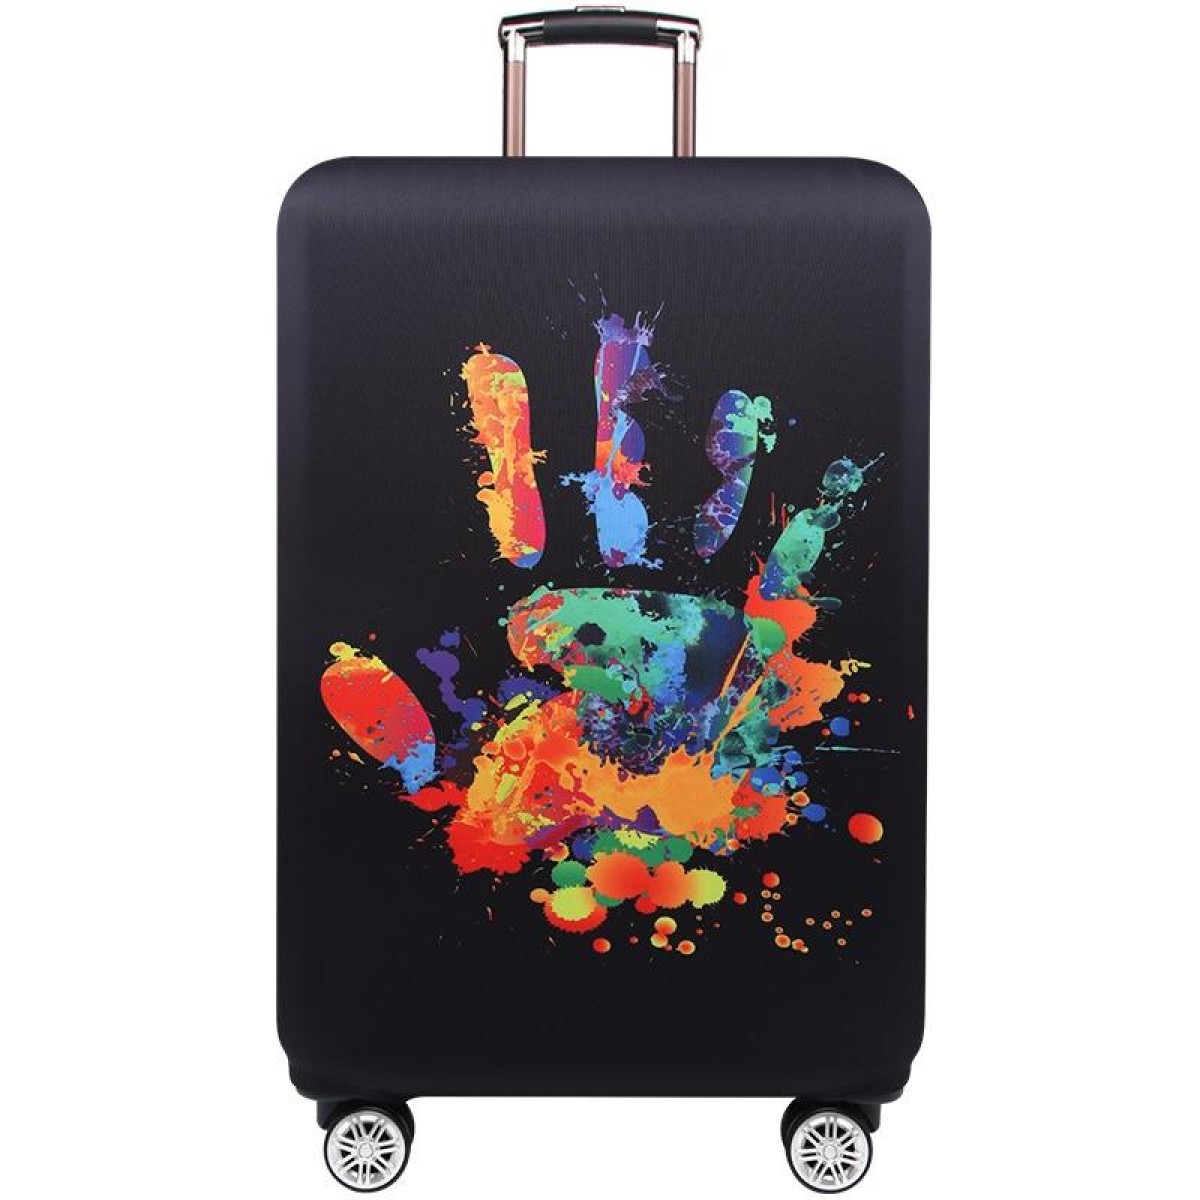 Luggage Thickening Wear-resistant Elastic Anti-dust Protection Cover, Size: XL(Colorful Handprints)